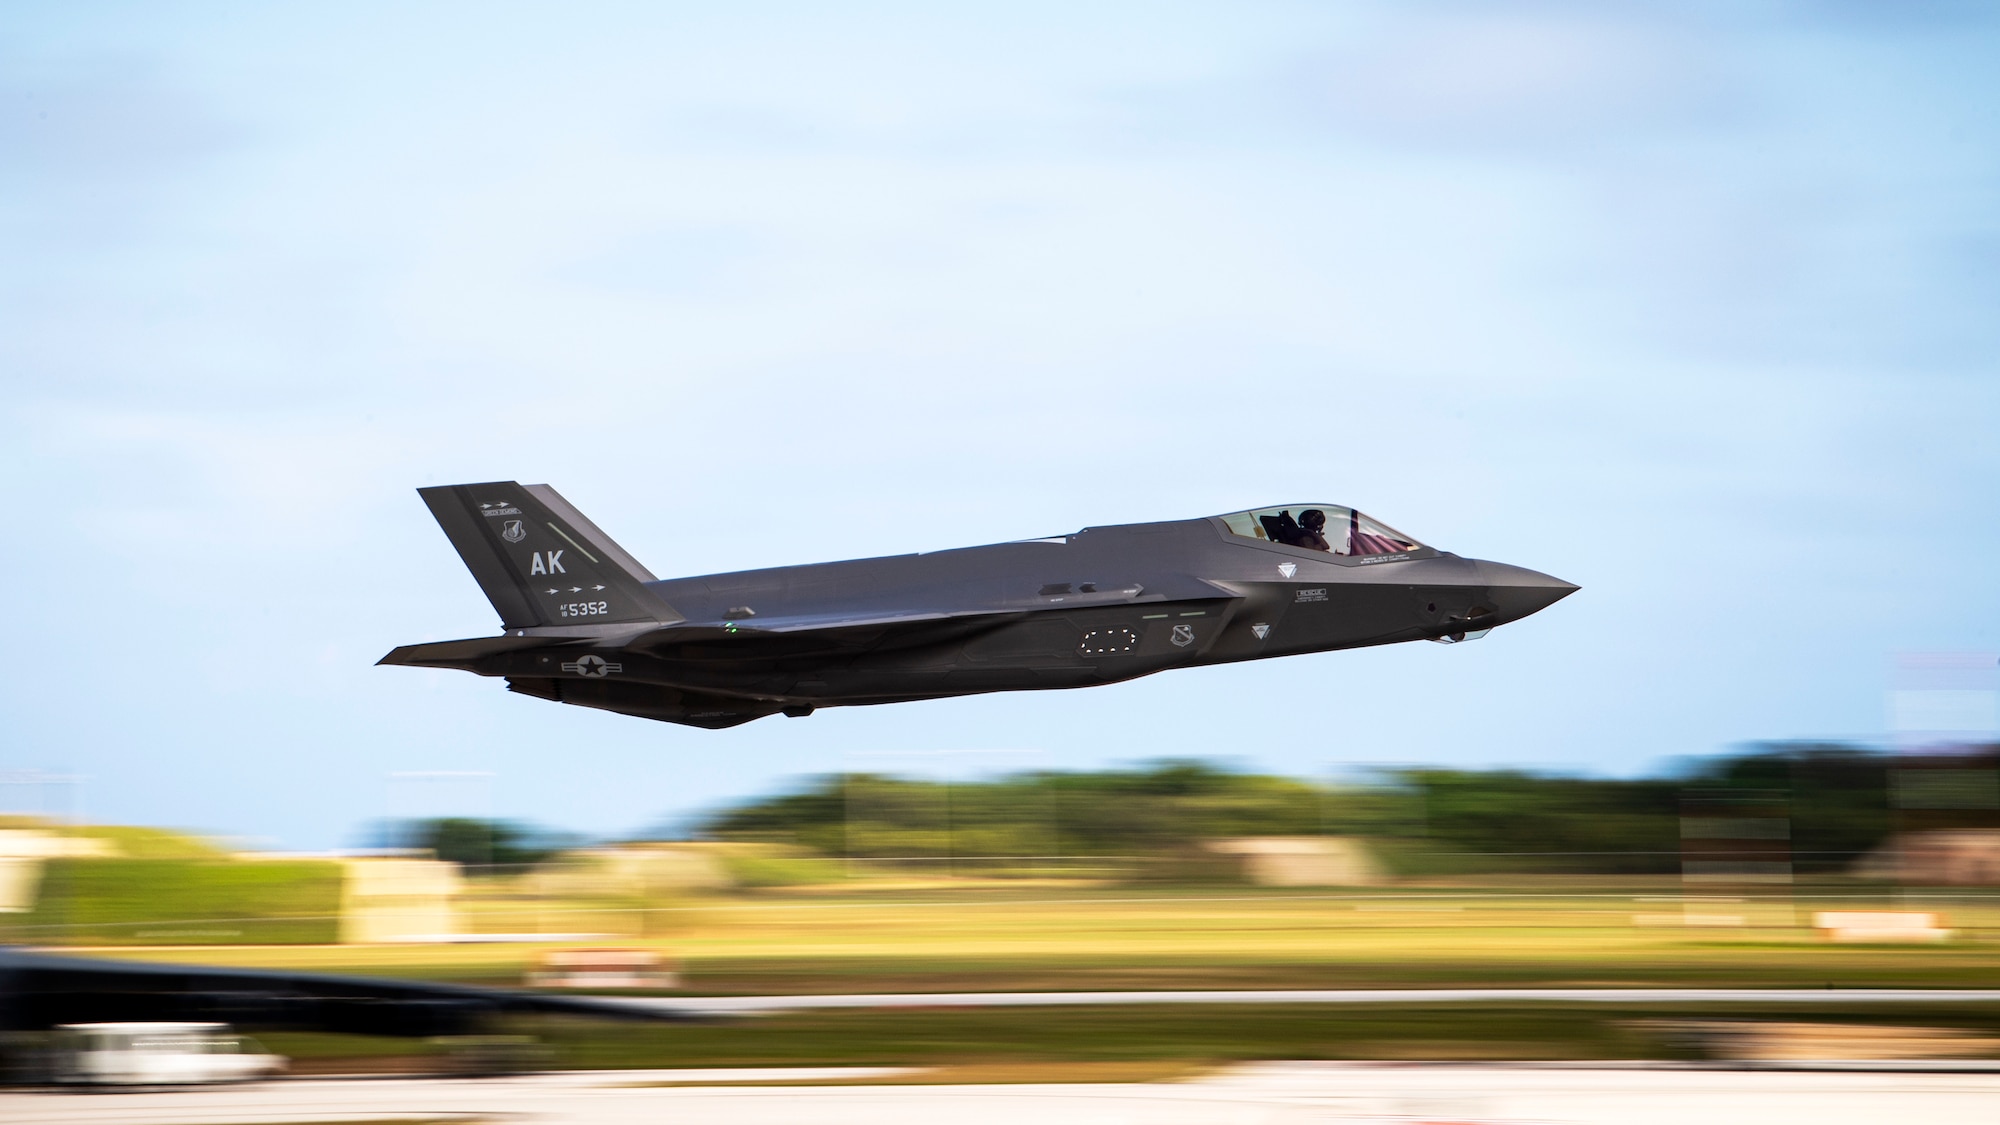 An F-35 Lightning II assigned to the 356th Fighter Squadron takes off to participate in an agile combat employment scenario at Andersen Air Force Base, Guam during exercise Cope North 21, Feb. 16, 2021. Engagements incorporating ACE concepts in “less than optimal environments” improve interoperability among forces and help allies and partners increase their capabilities, creating the greatest possible opportunity for long-term advancement of combined interests. (U.S. Air Force photo by Senior Airman Duncan C. Bevan)